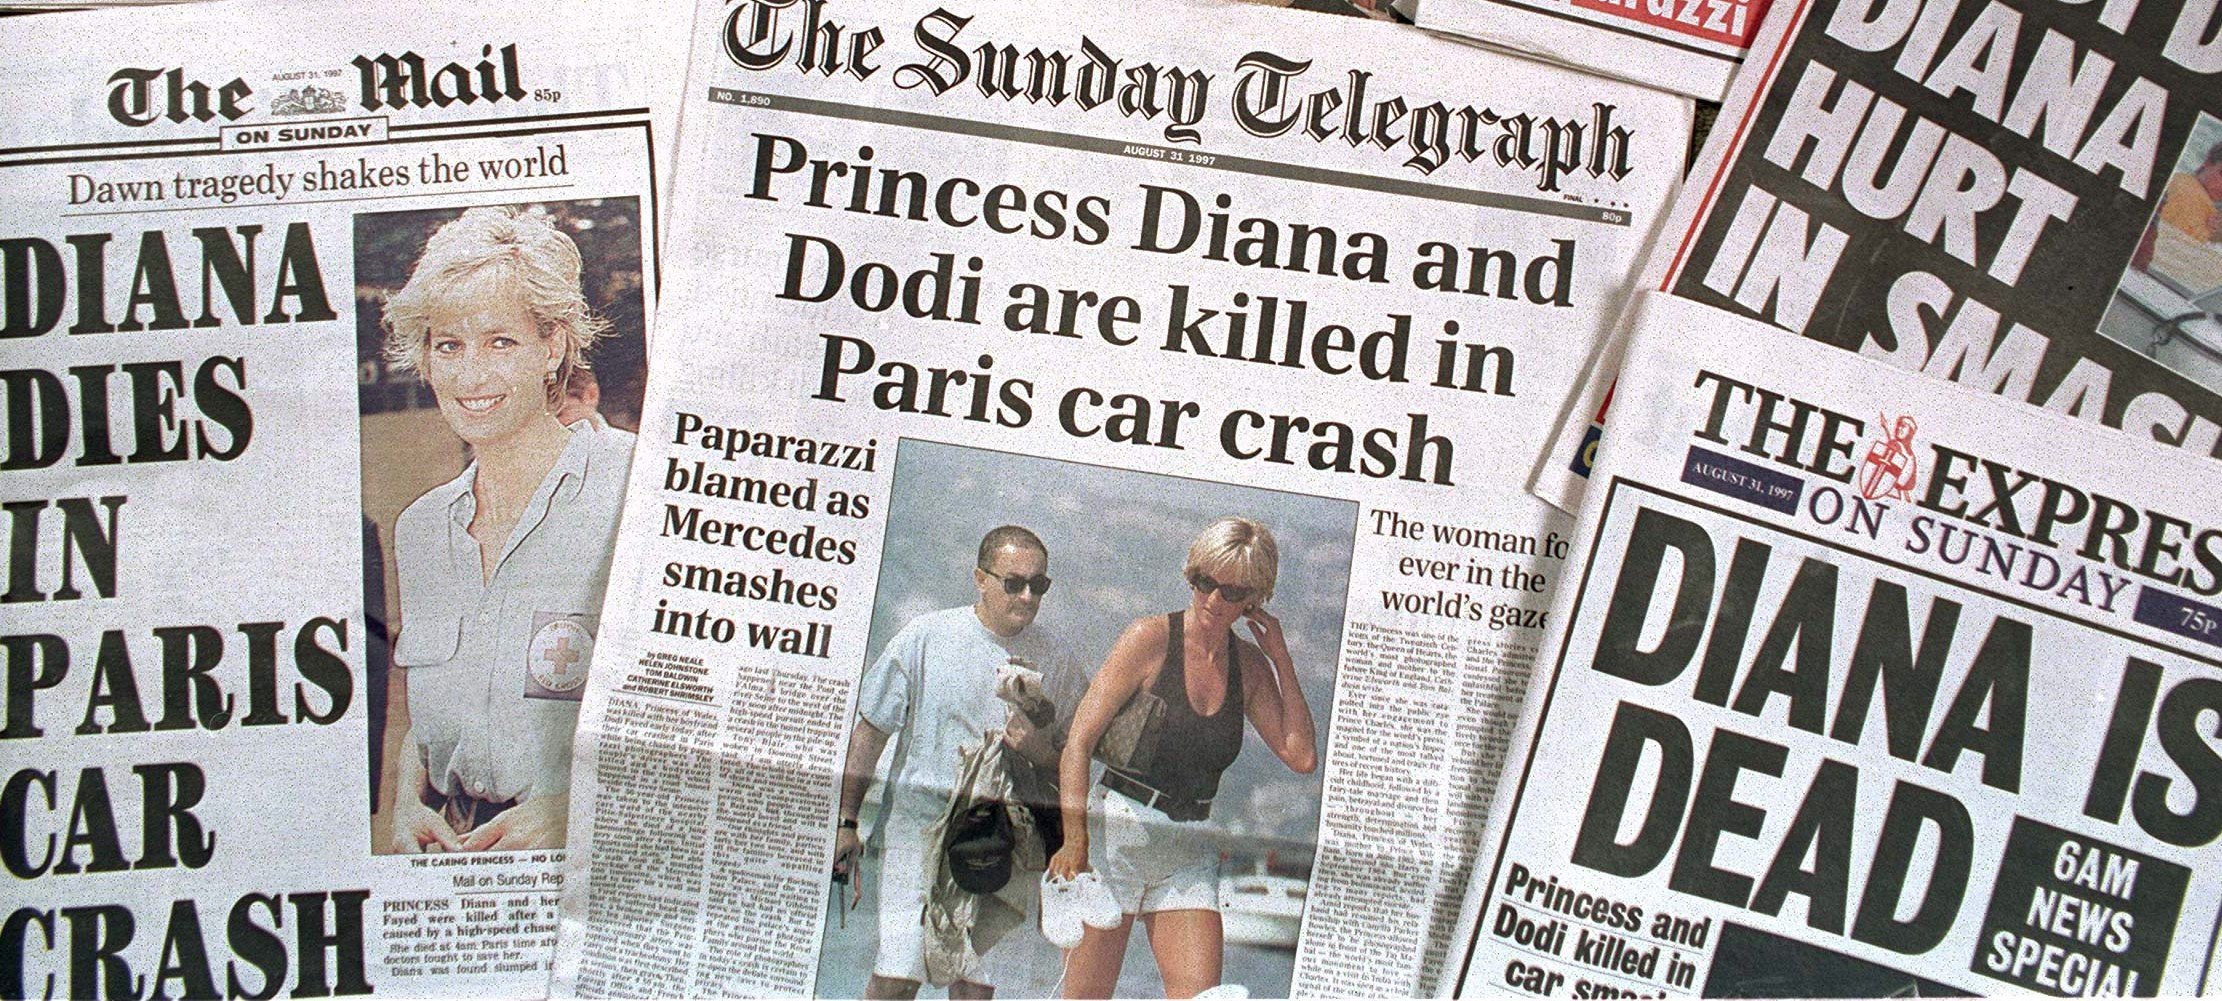 Newspaper headlines announcing the death of Princess Diana and Dodi Fayed